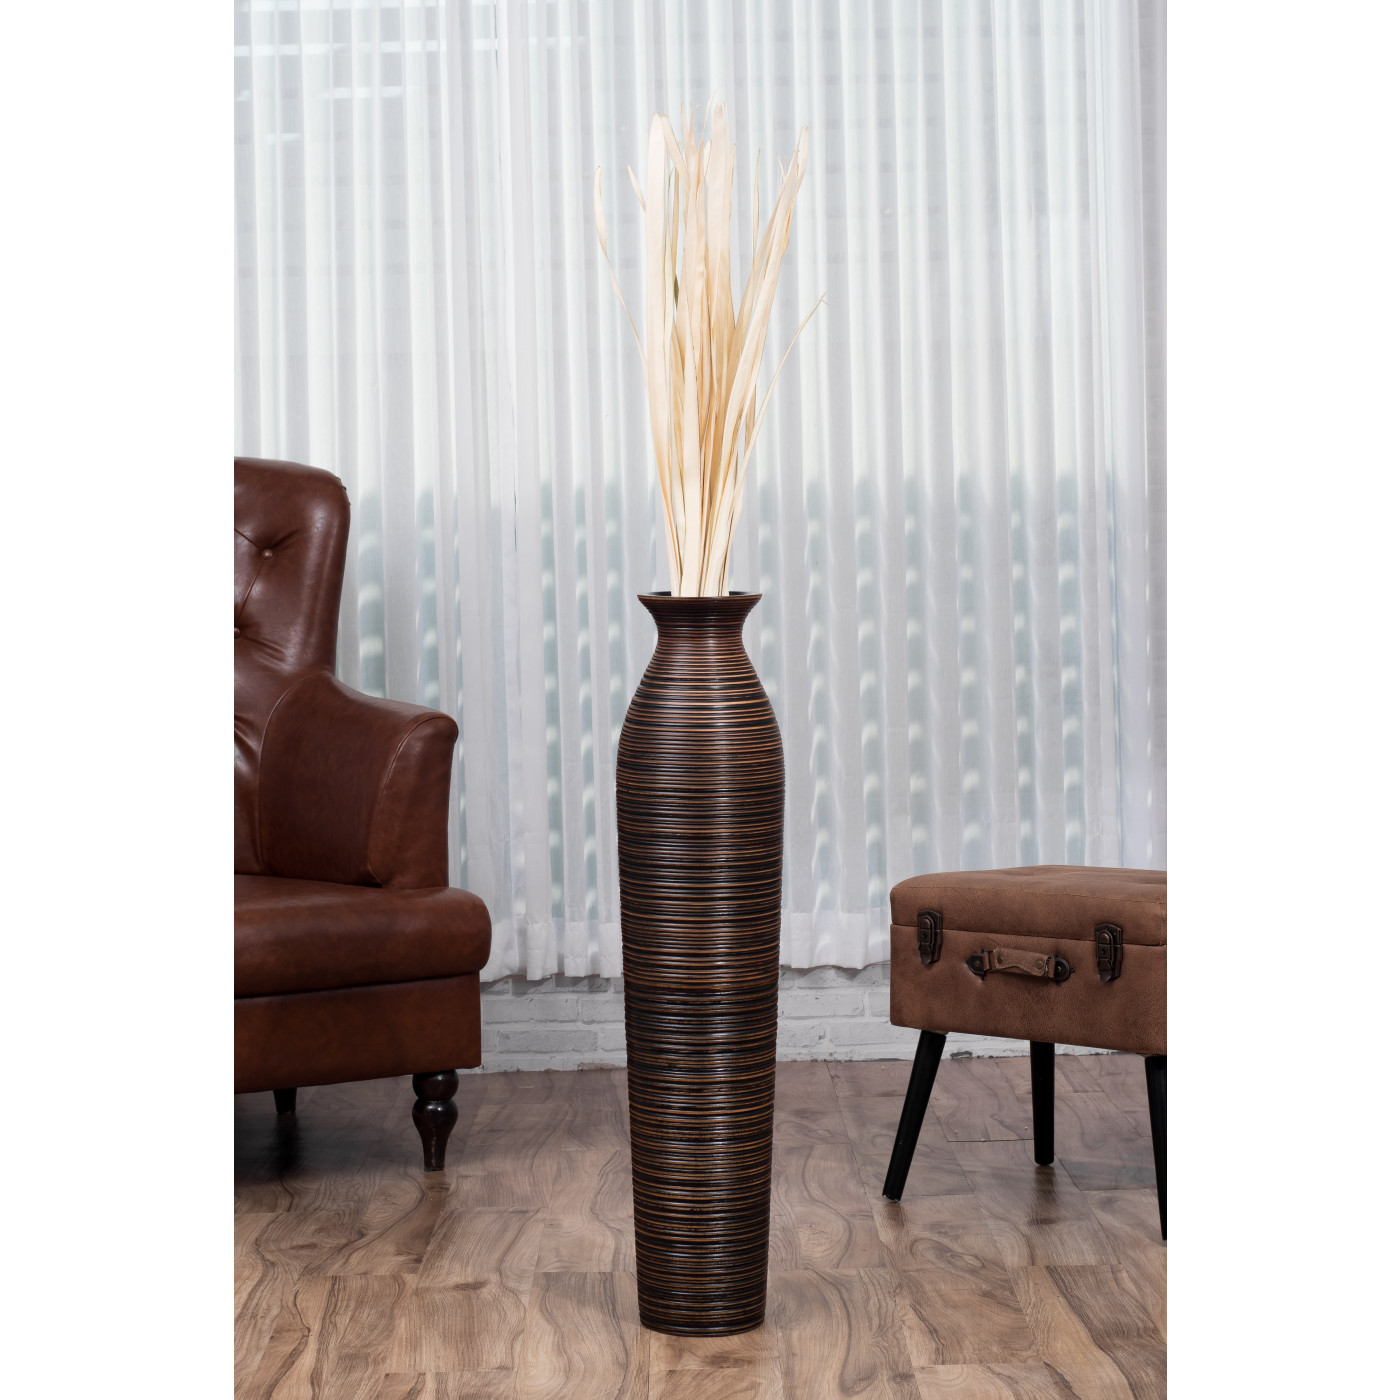 Leewadee Large Brown Home Decor Floor Vase – Wooden 36 inches Tall  Farmhouse Decor Flower Holder For